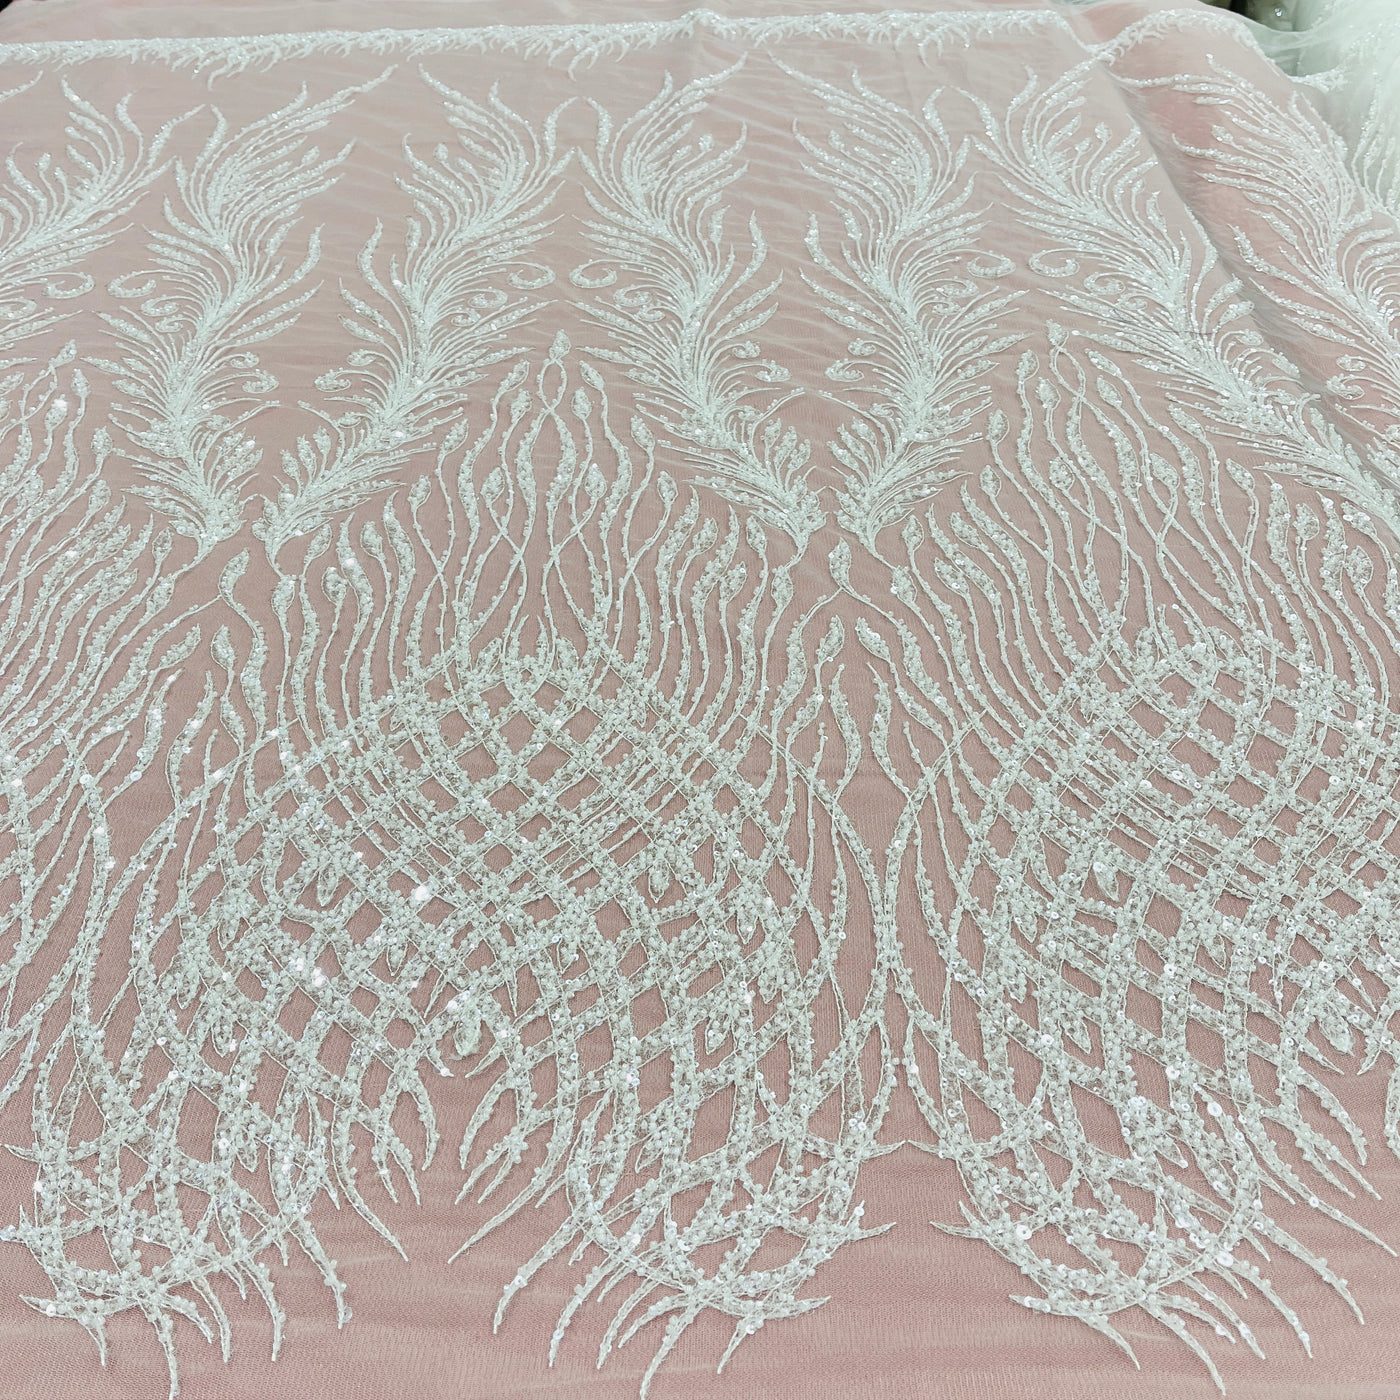 Beaded Lace Fabric Embroidered on 100% Polyester Net Mesh | Lace USA - GD-3785